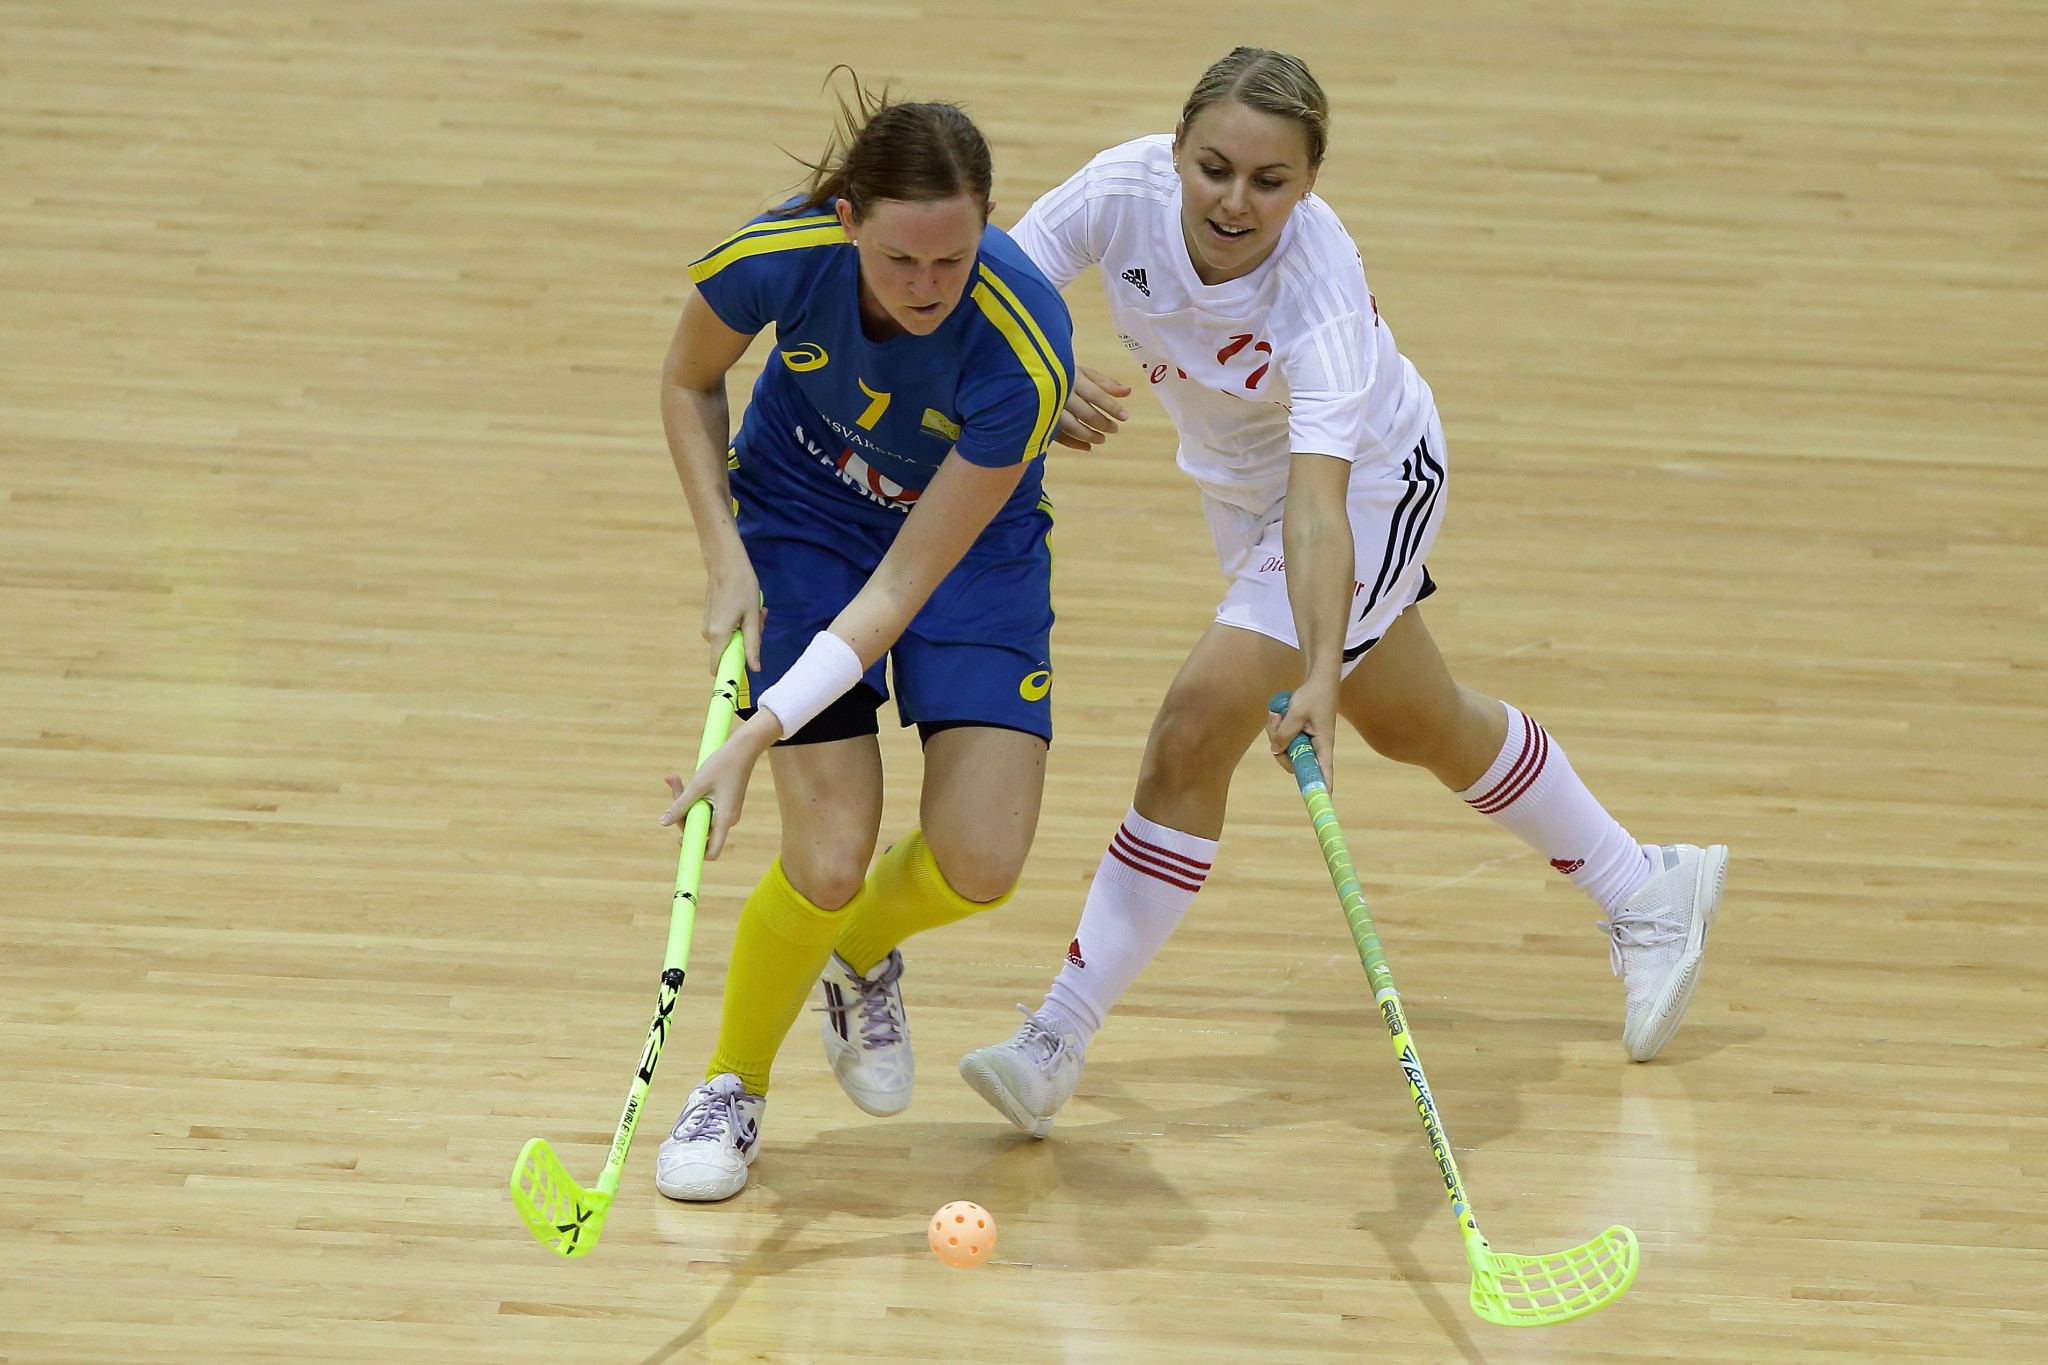 Only Sweden, Finland and Switzerland have won the Women's Under-19 World Floorball Championships since its inauguration in 2004 ©Getty Images